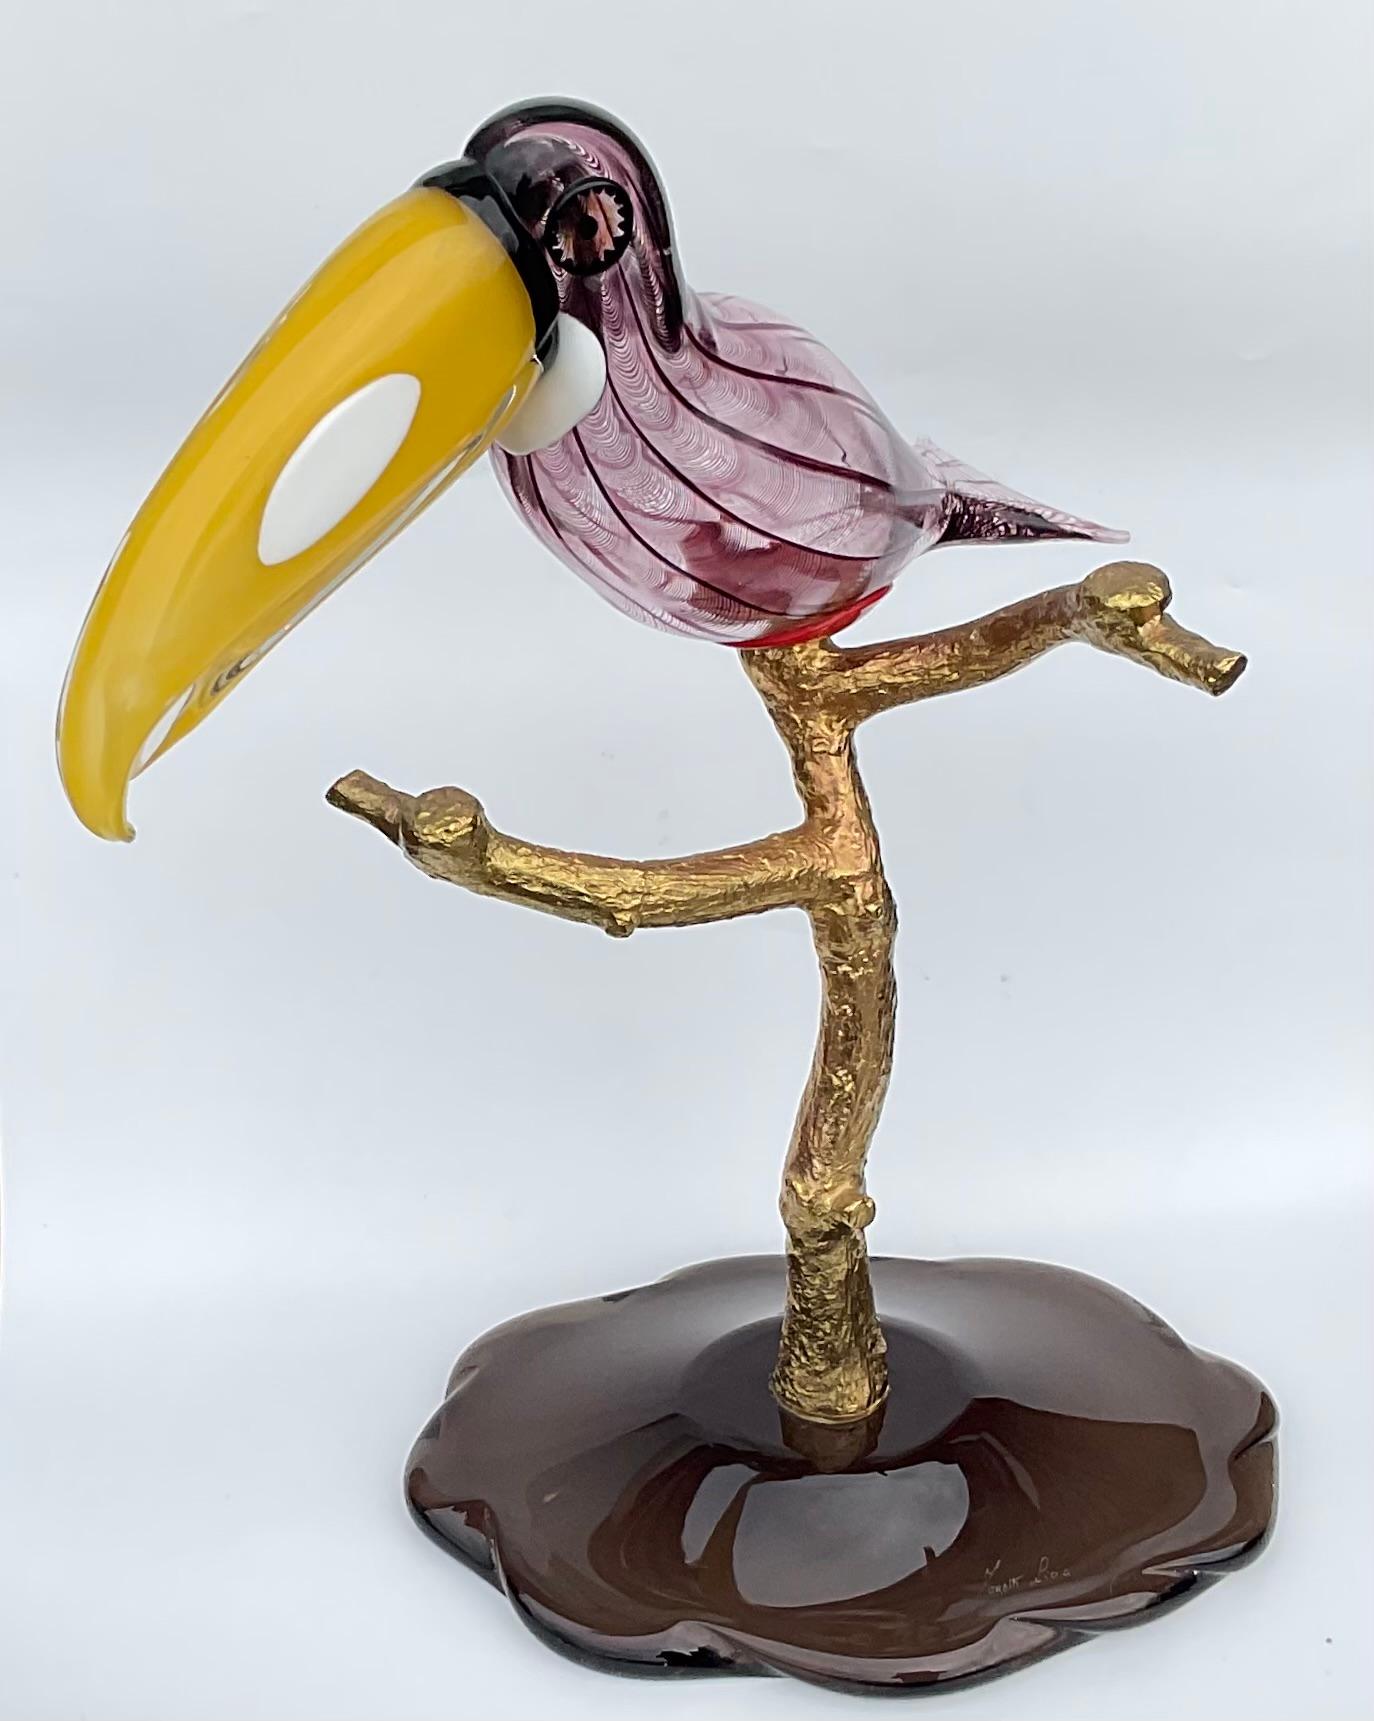 Licio Zanetti Large Murano Art glass Toucan Bird Sculpture on brass perch Signed By the artist on base as pictured. The toucan can be removed and placed at different angles. The sculpture breaks down into 3 separate pieces as designed. 